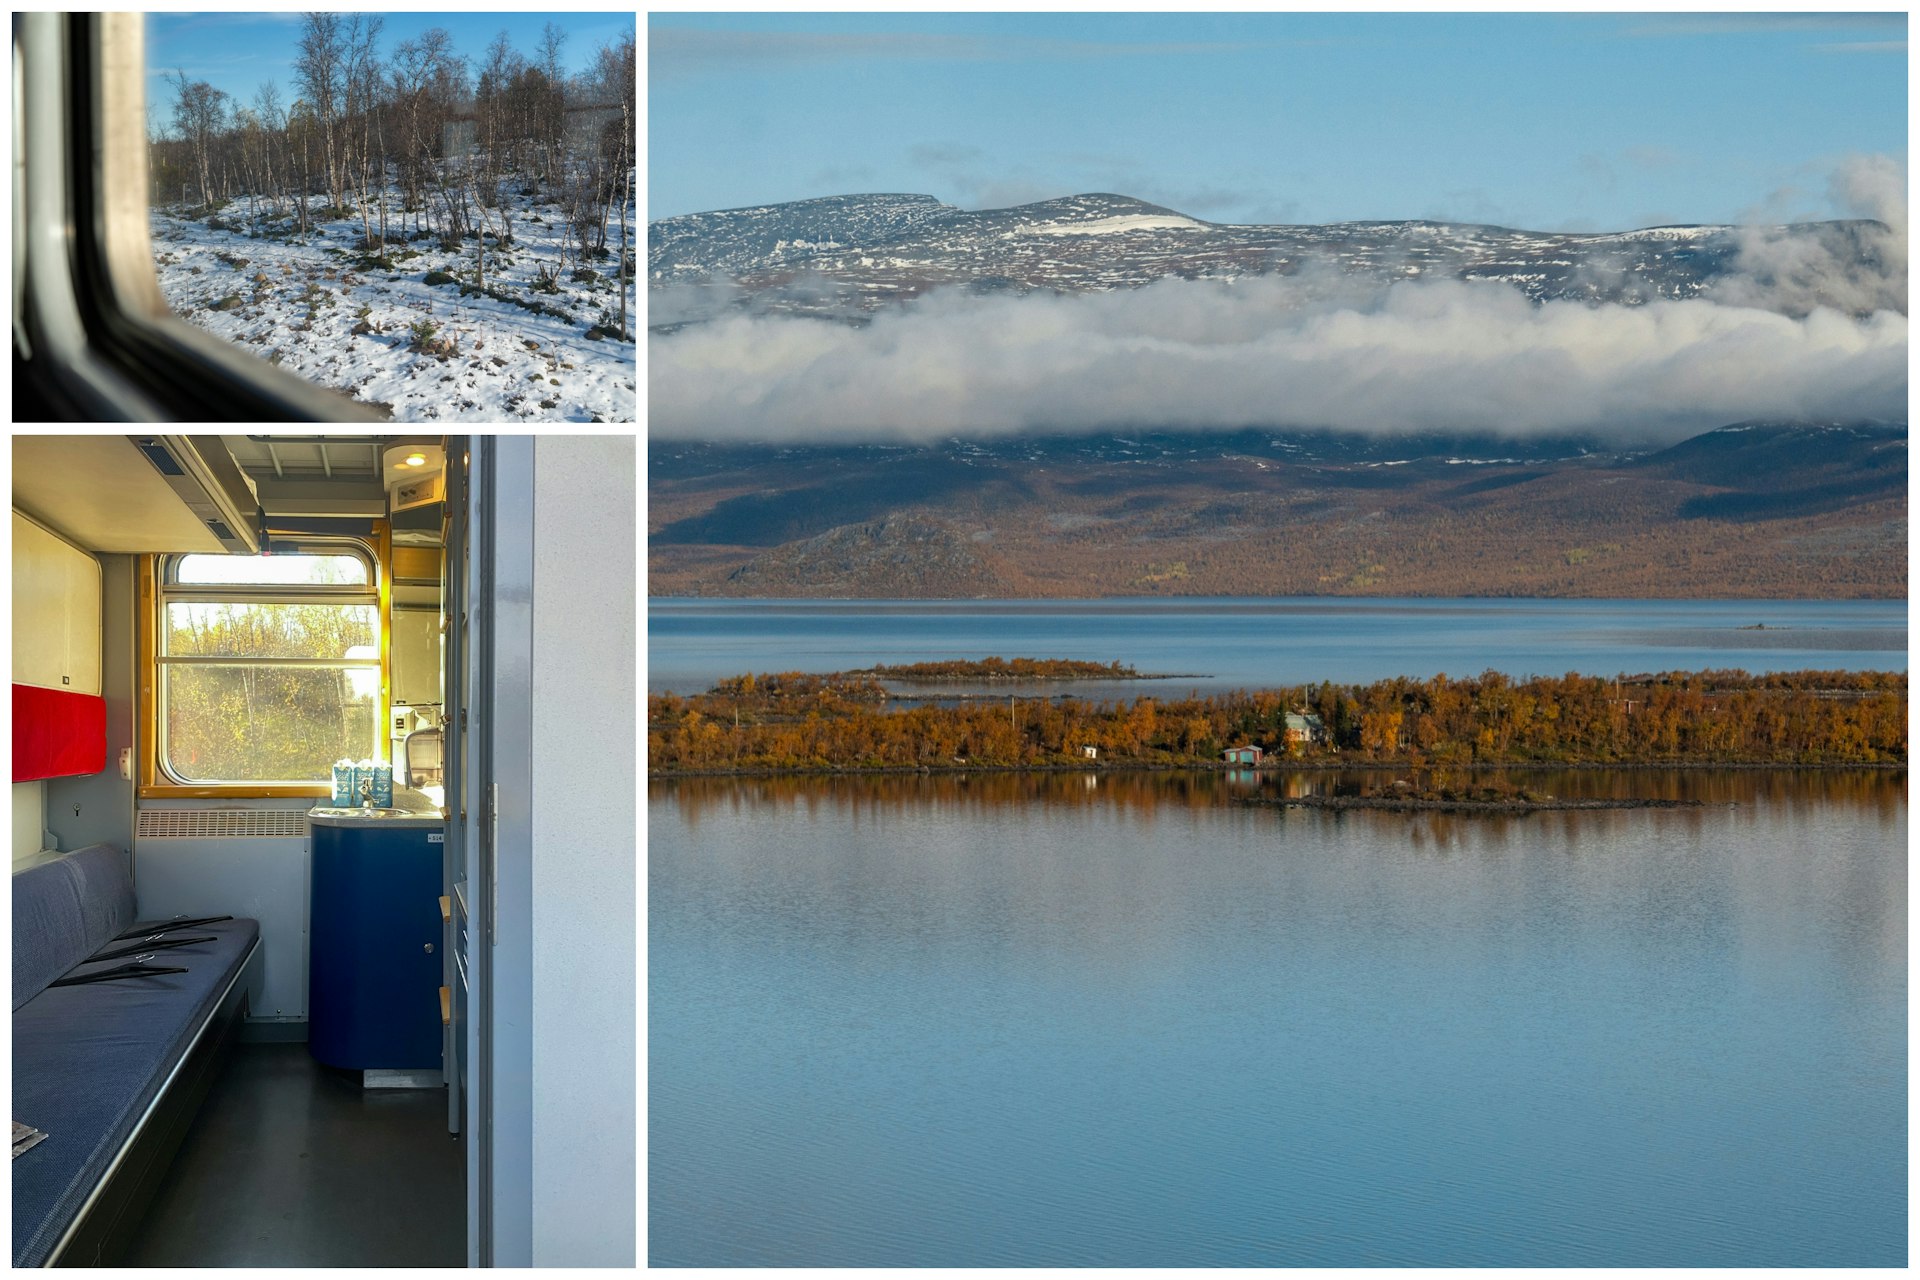 A collage of images from a train journey through the Arctic Circle including snowy landscapes and a sleeper carriage